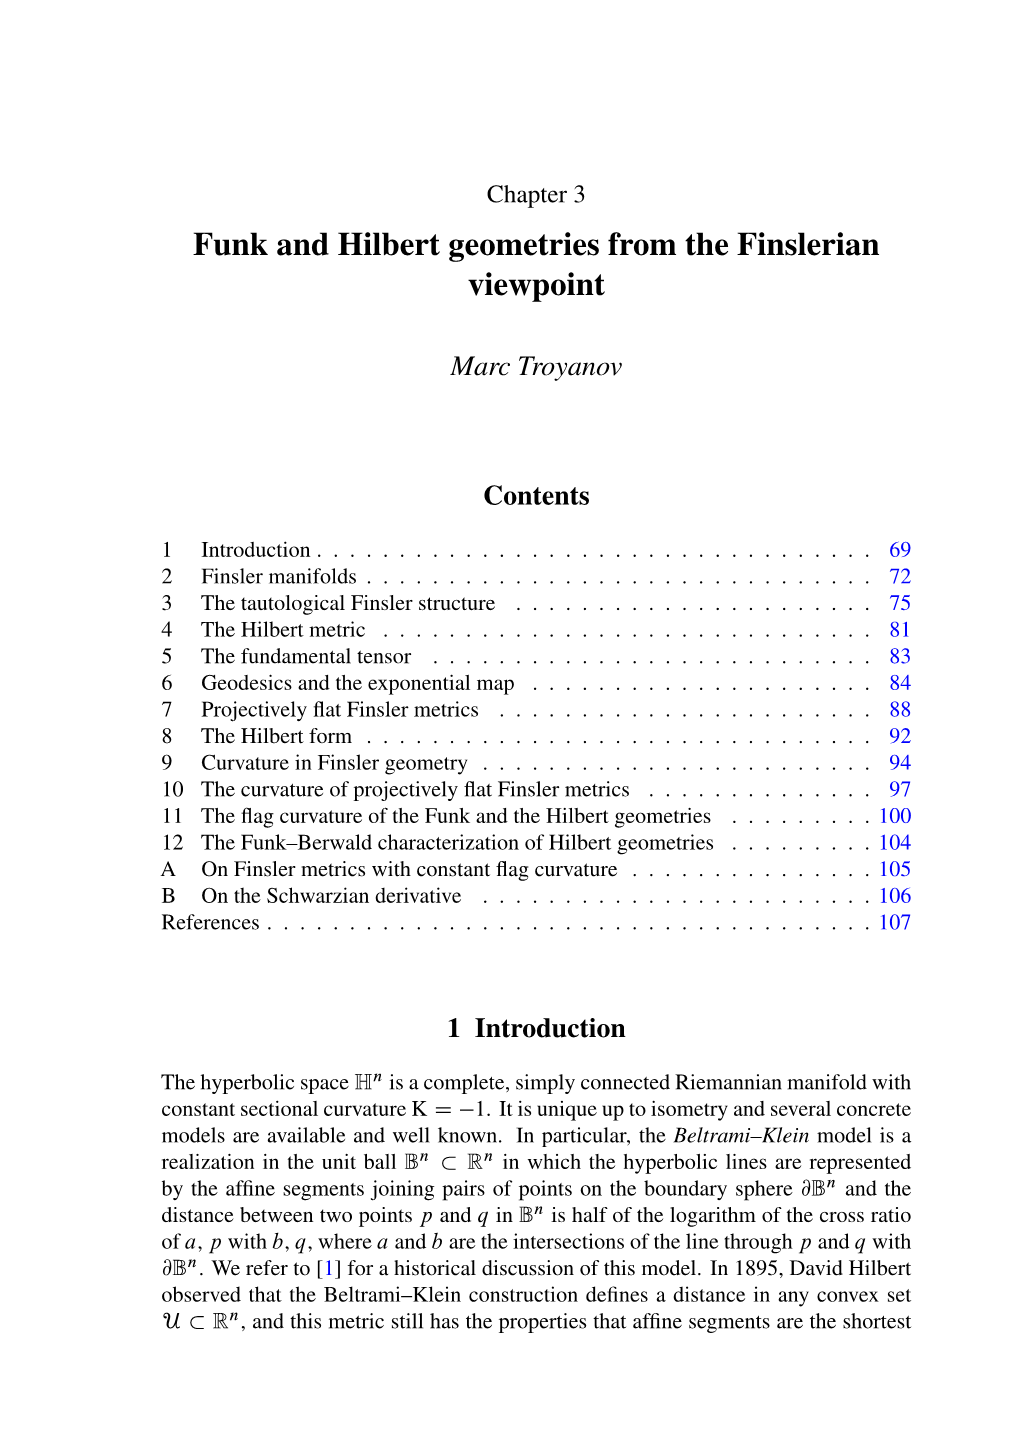 Funk and Hilbert Geometries from the Finslerian Viewpoint